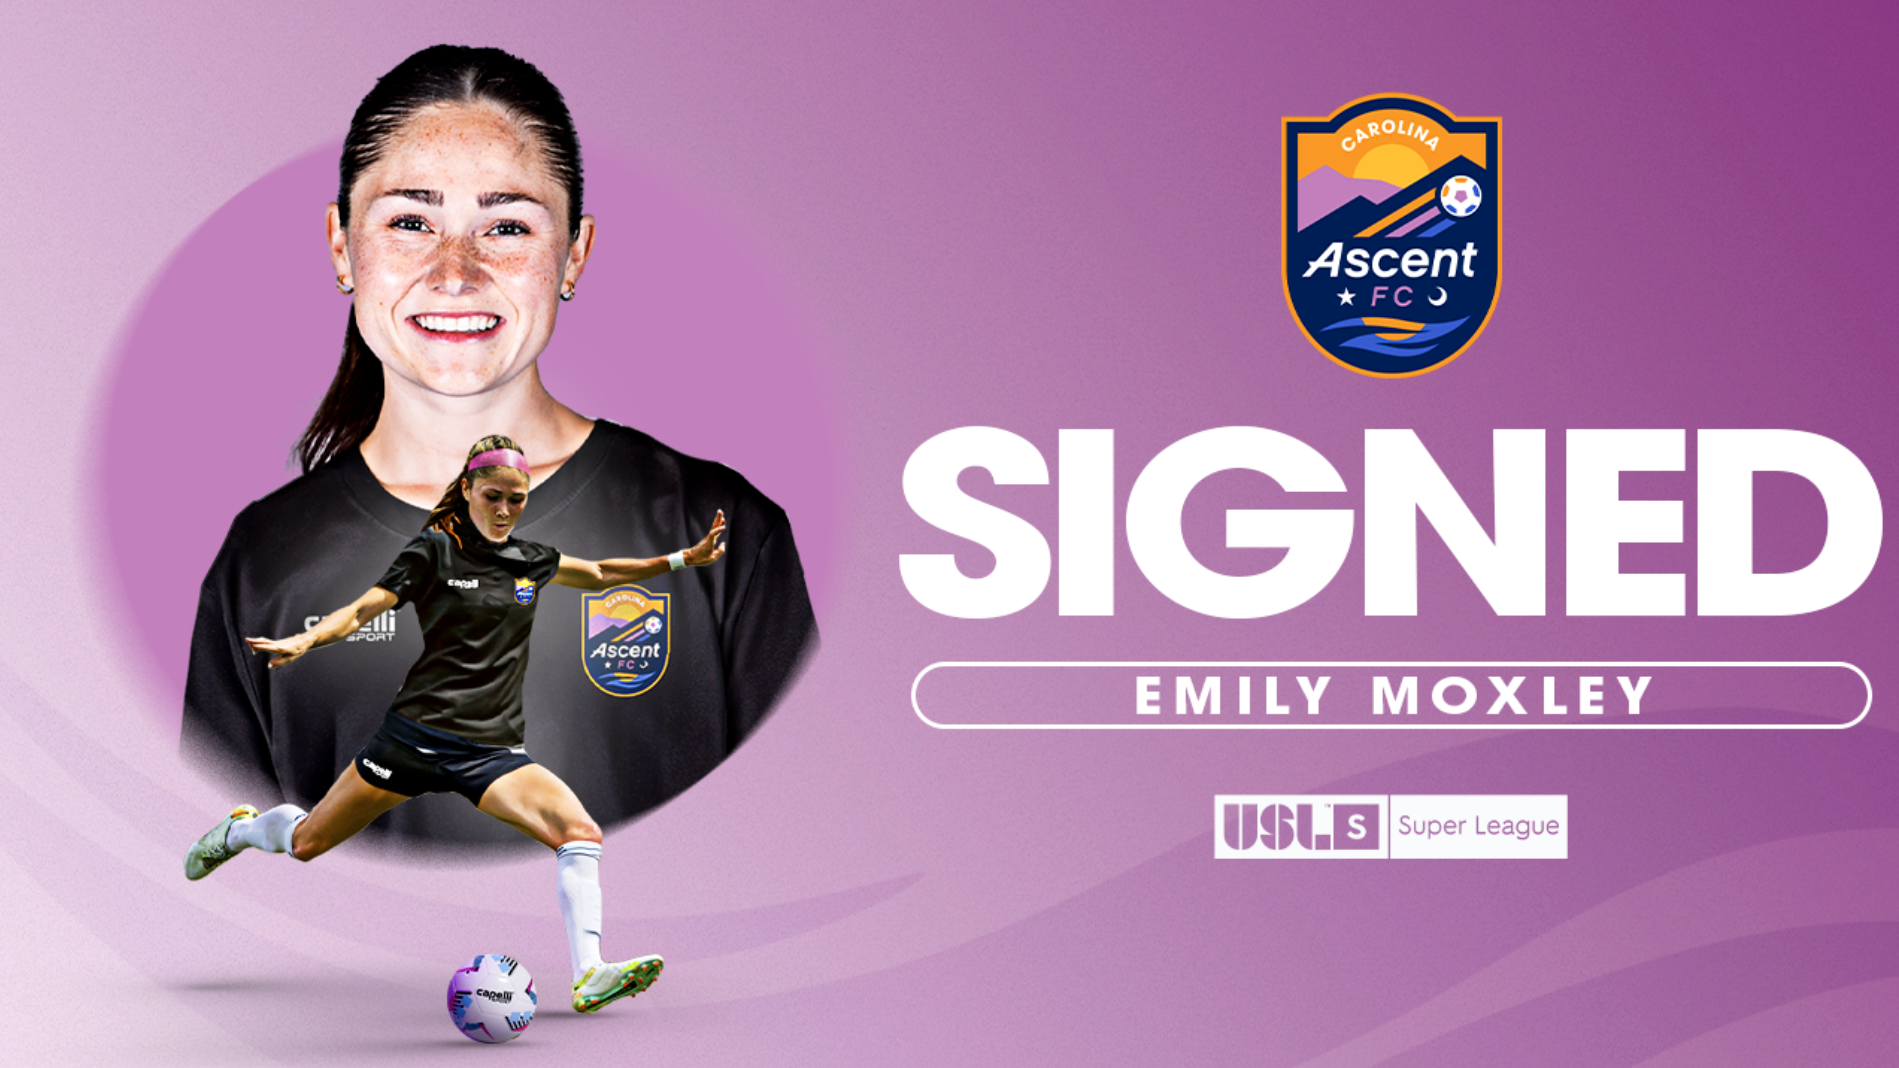 UNC Tar Heel Champion, Emily Moxley, Joins Carolina Ascent FC featured image